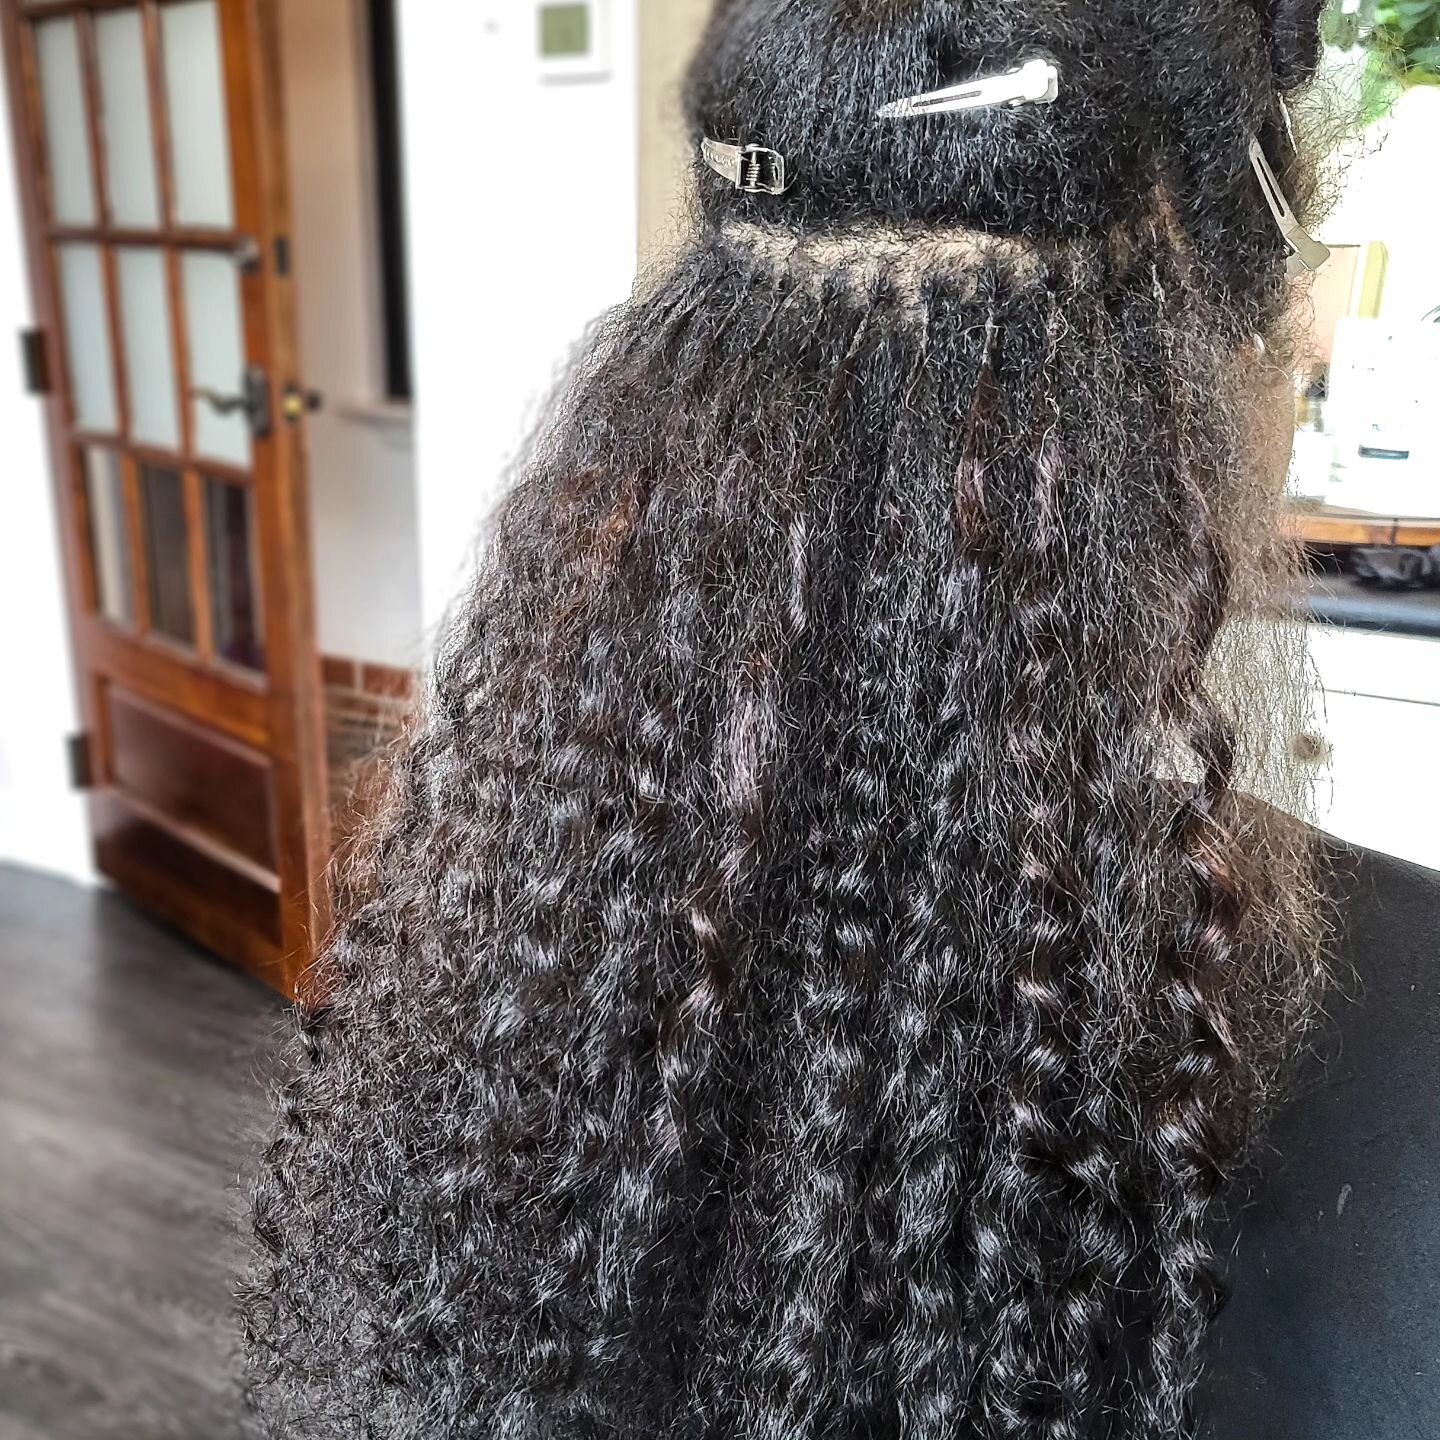 What to expect from keratin bond extensions...

The best hair EVER!

Custom textures are available.
Mixing 2-3 curl patterns creates the most natural look 💫

#keratinbonds #bydestinynicole #texturedextensions #curlyktips #curlyextensions #Charlotte 